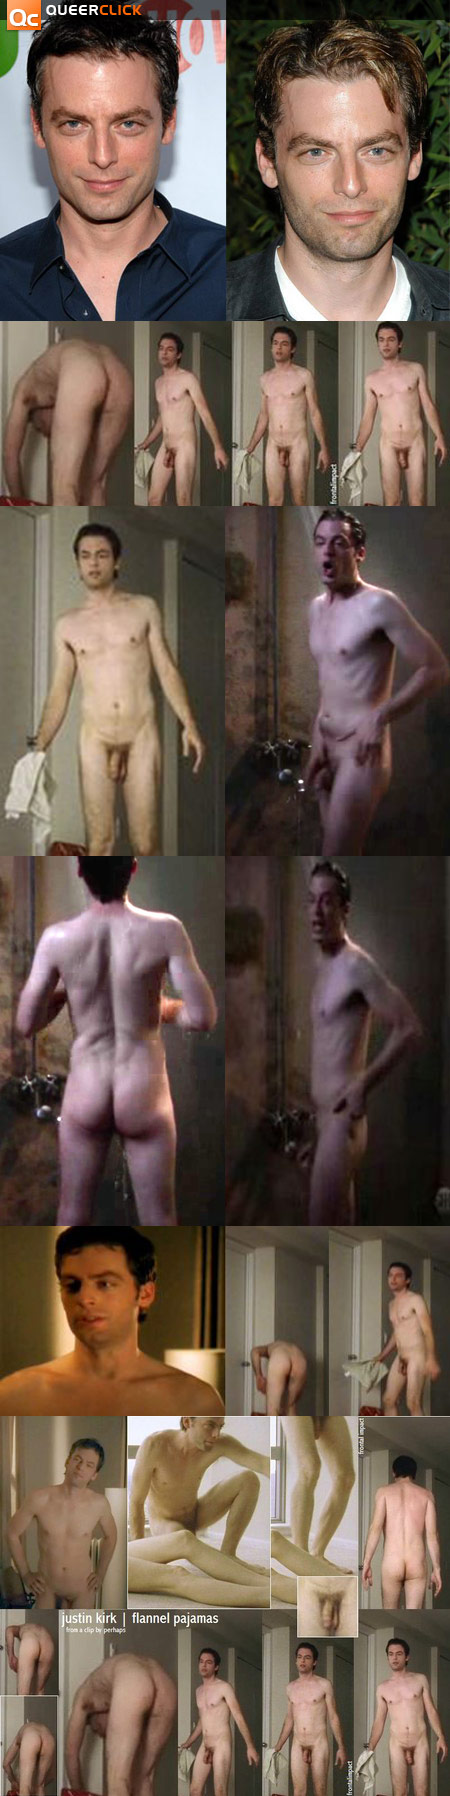 Weeds'Justin Kirk Shows Us His Sack - QueerClick.